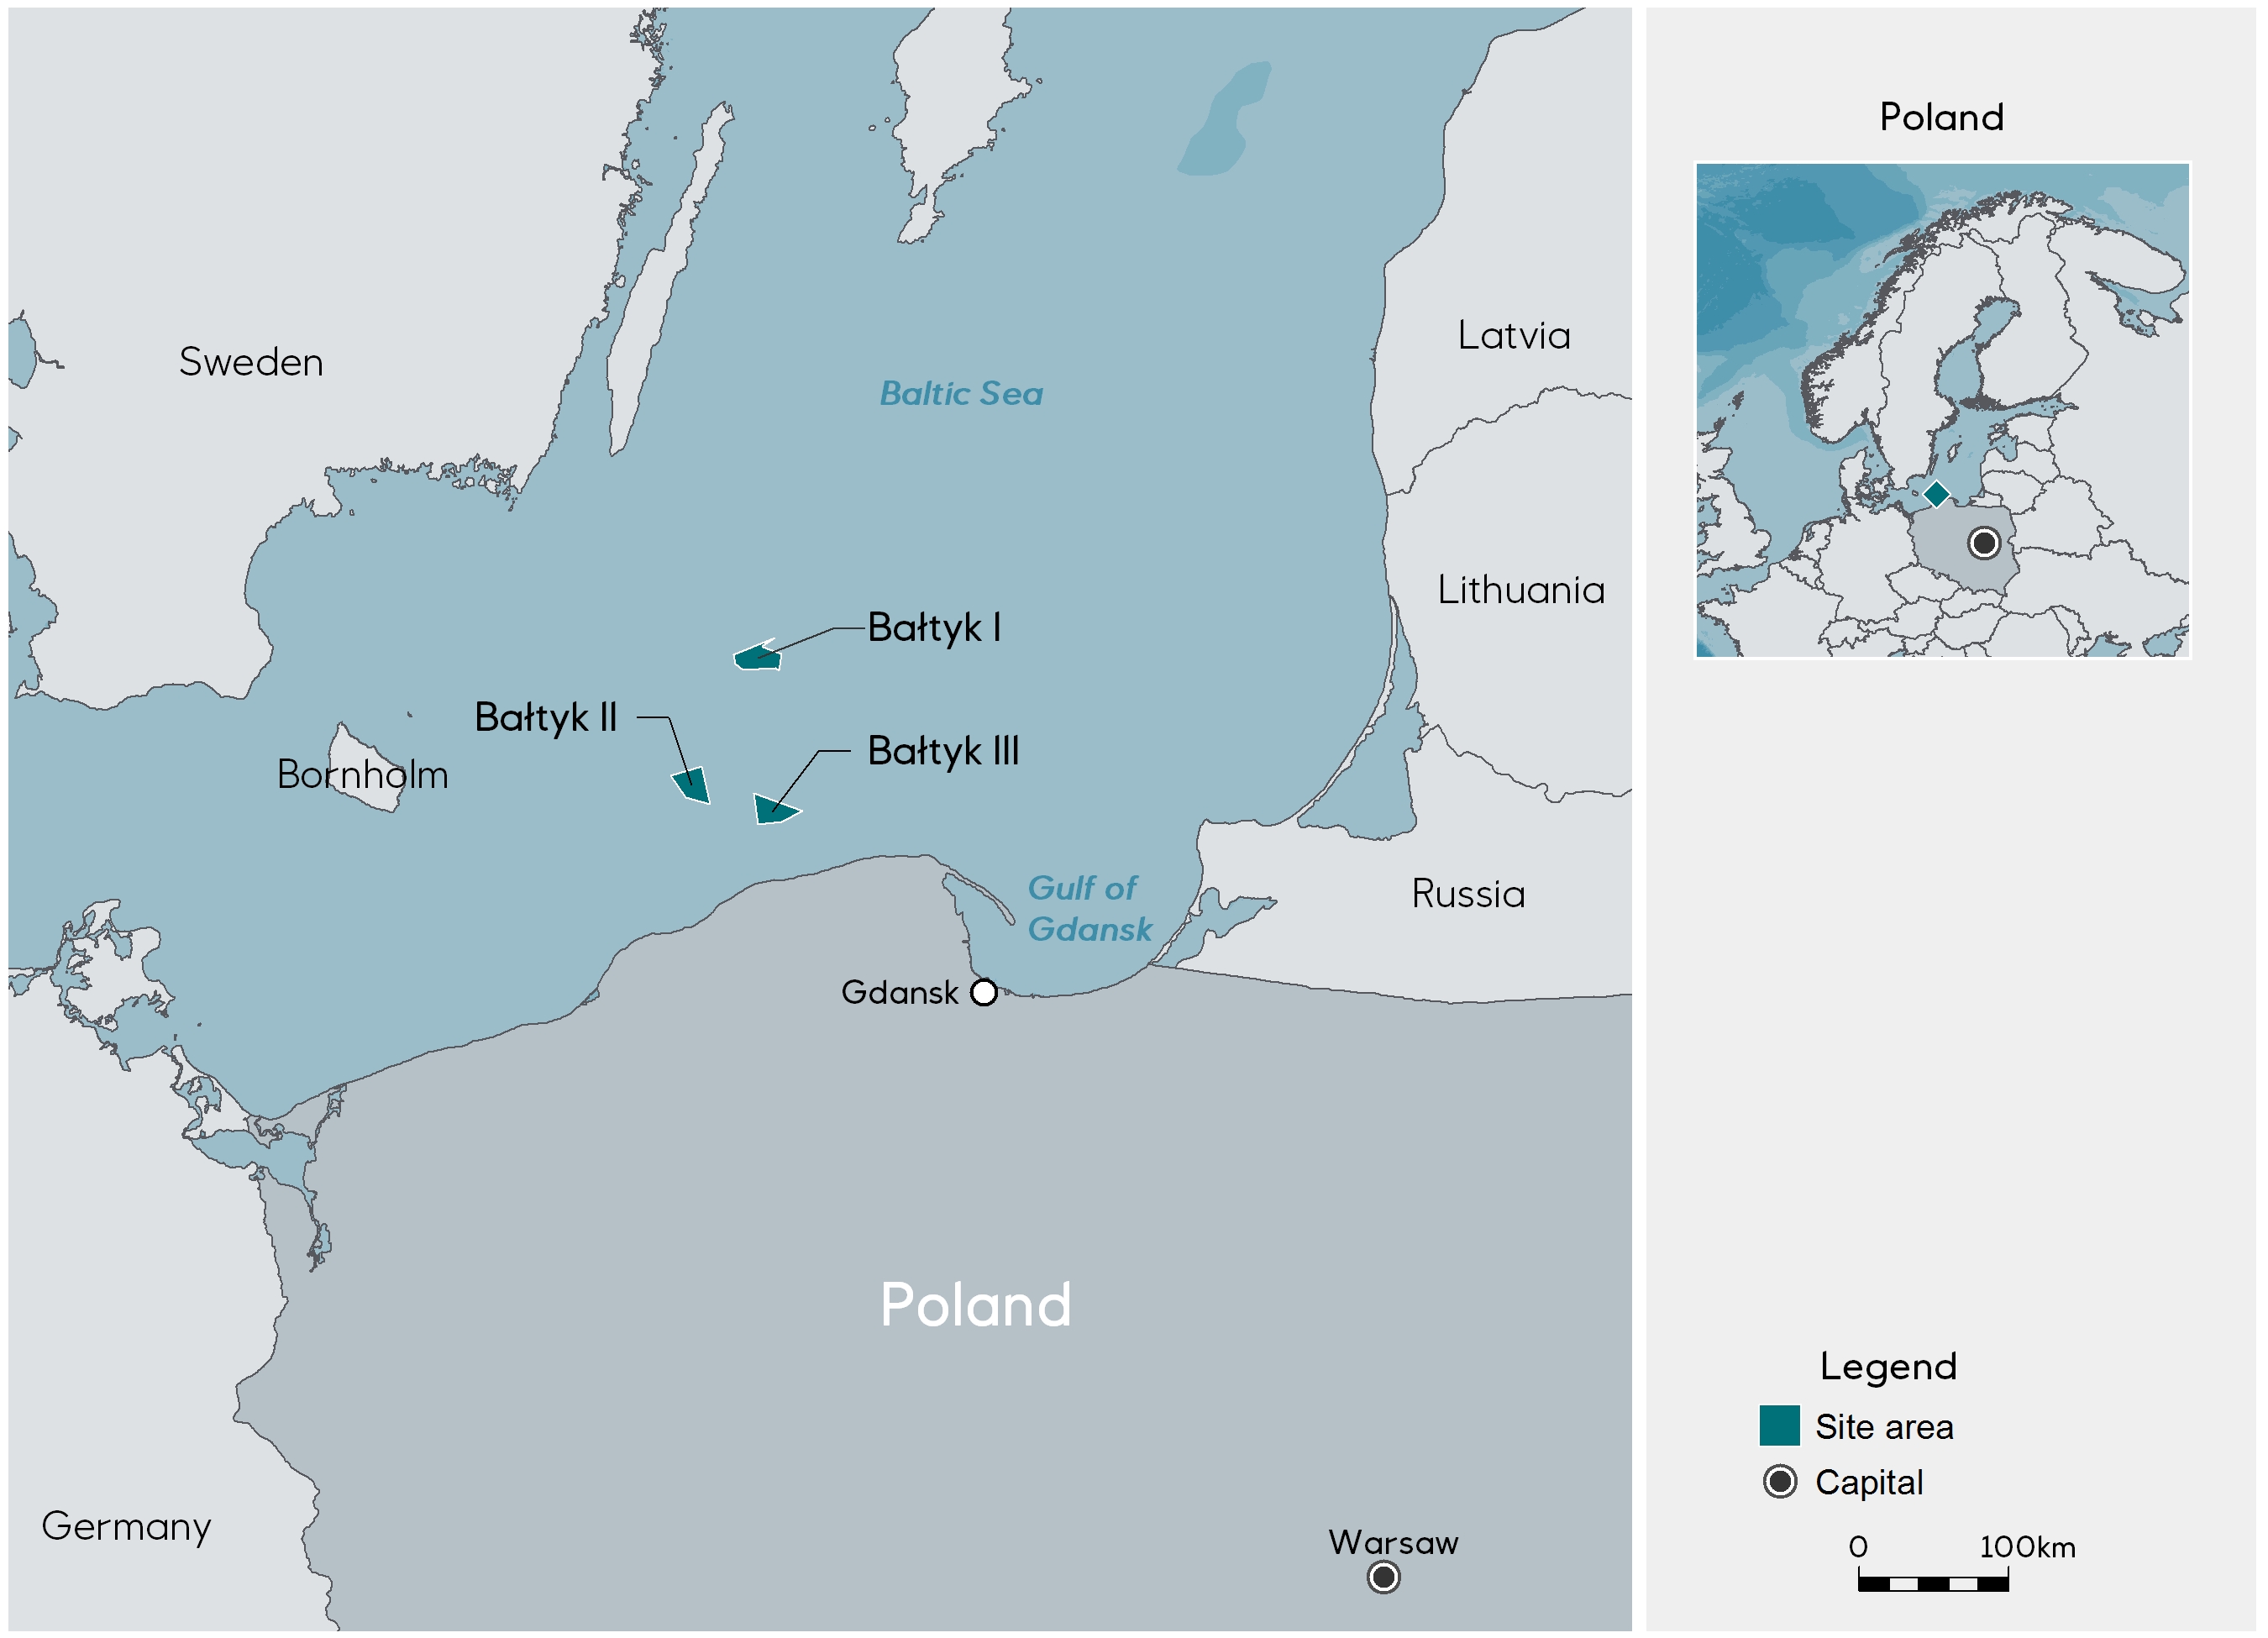 Equinor and Polenergia Submit CfD Applications in Poland